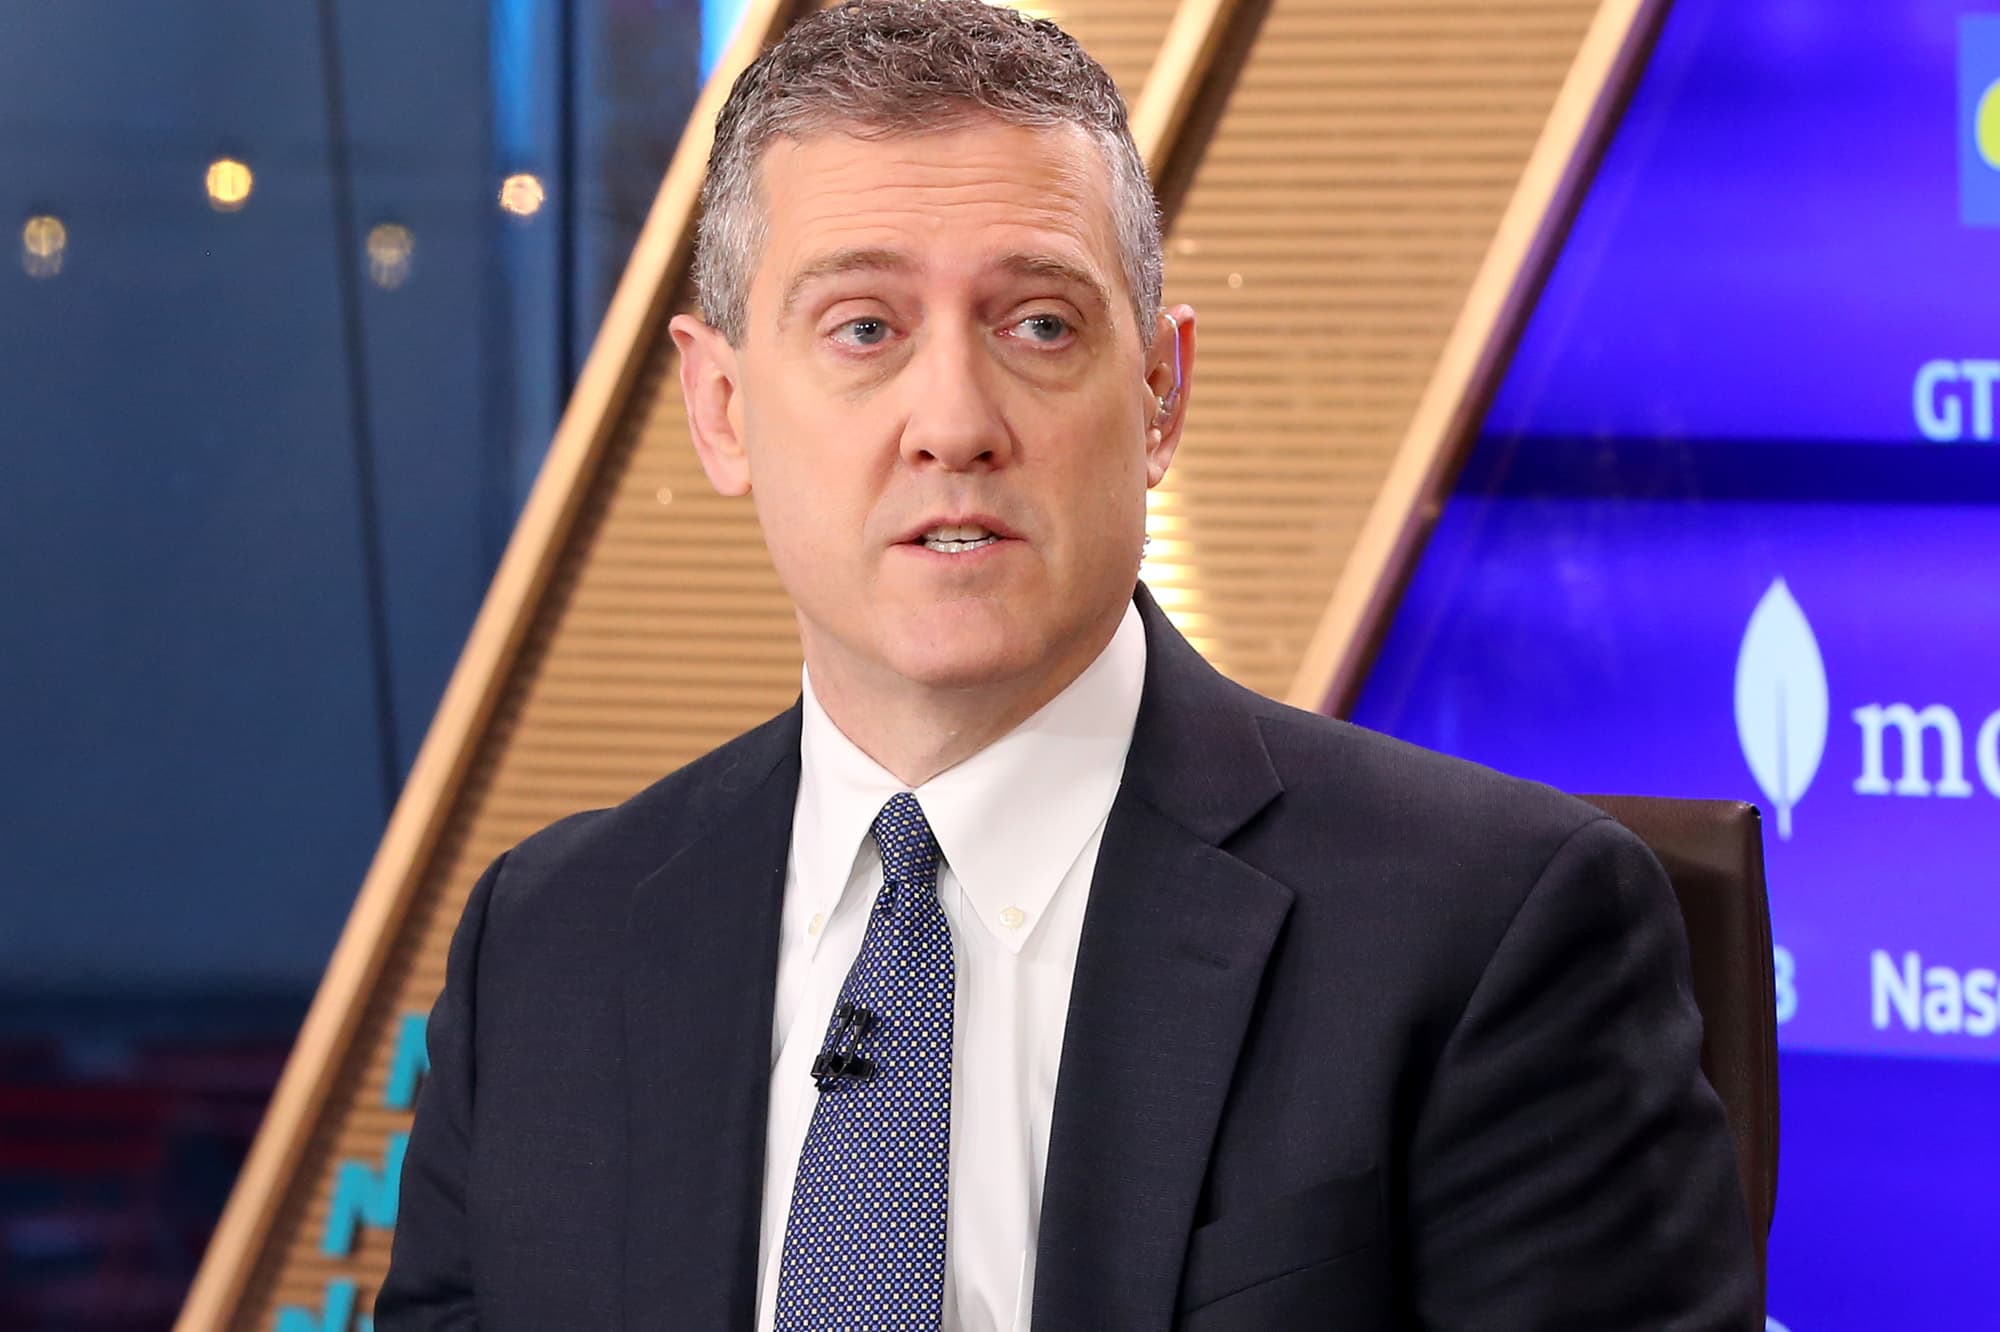 Bullard says the Fed needs to ‘front-load’ tightening because inflation is accelerating